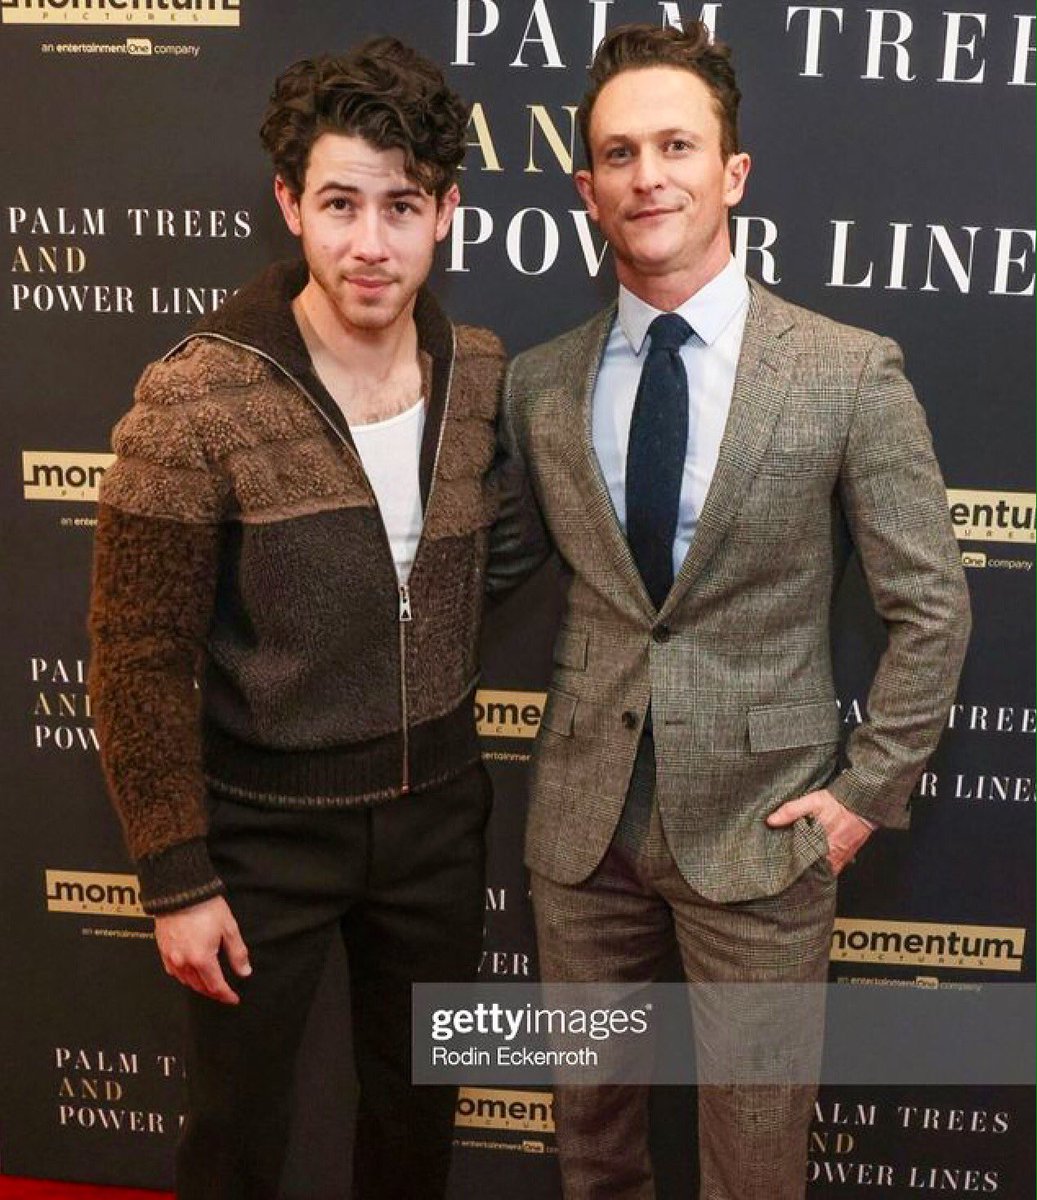 Nick with his mate Tuck, in West Hollywood last night for the Premiere of his #PalmTreesAndPowerLines 🎥
#NickJonas  #JonathanTucker

(📸Rodin Eckenroth for @GettyImages)